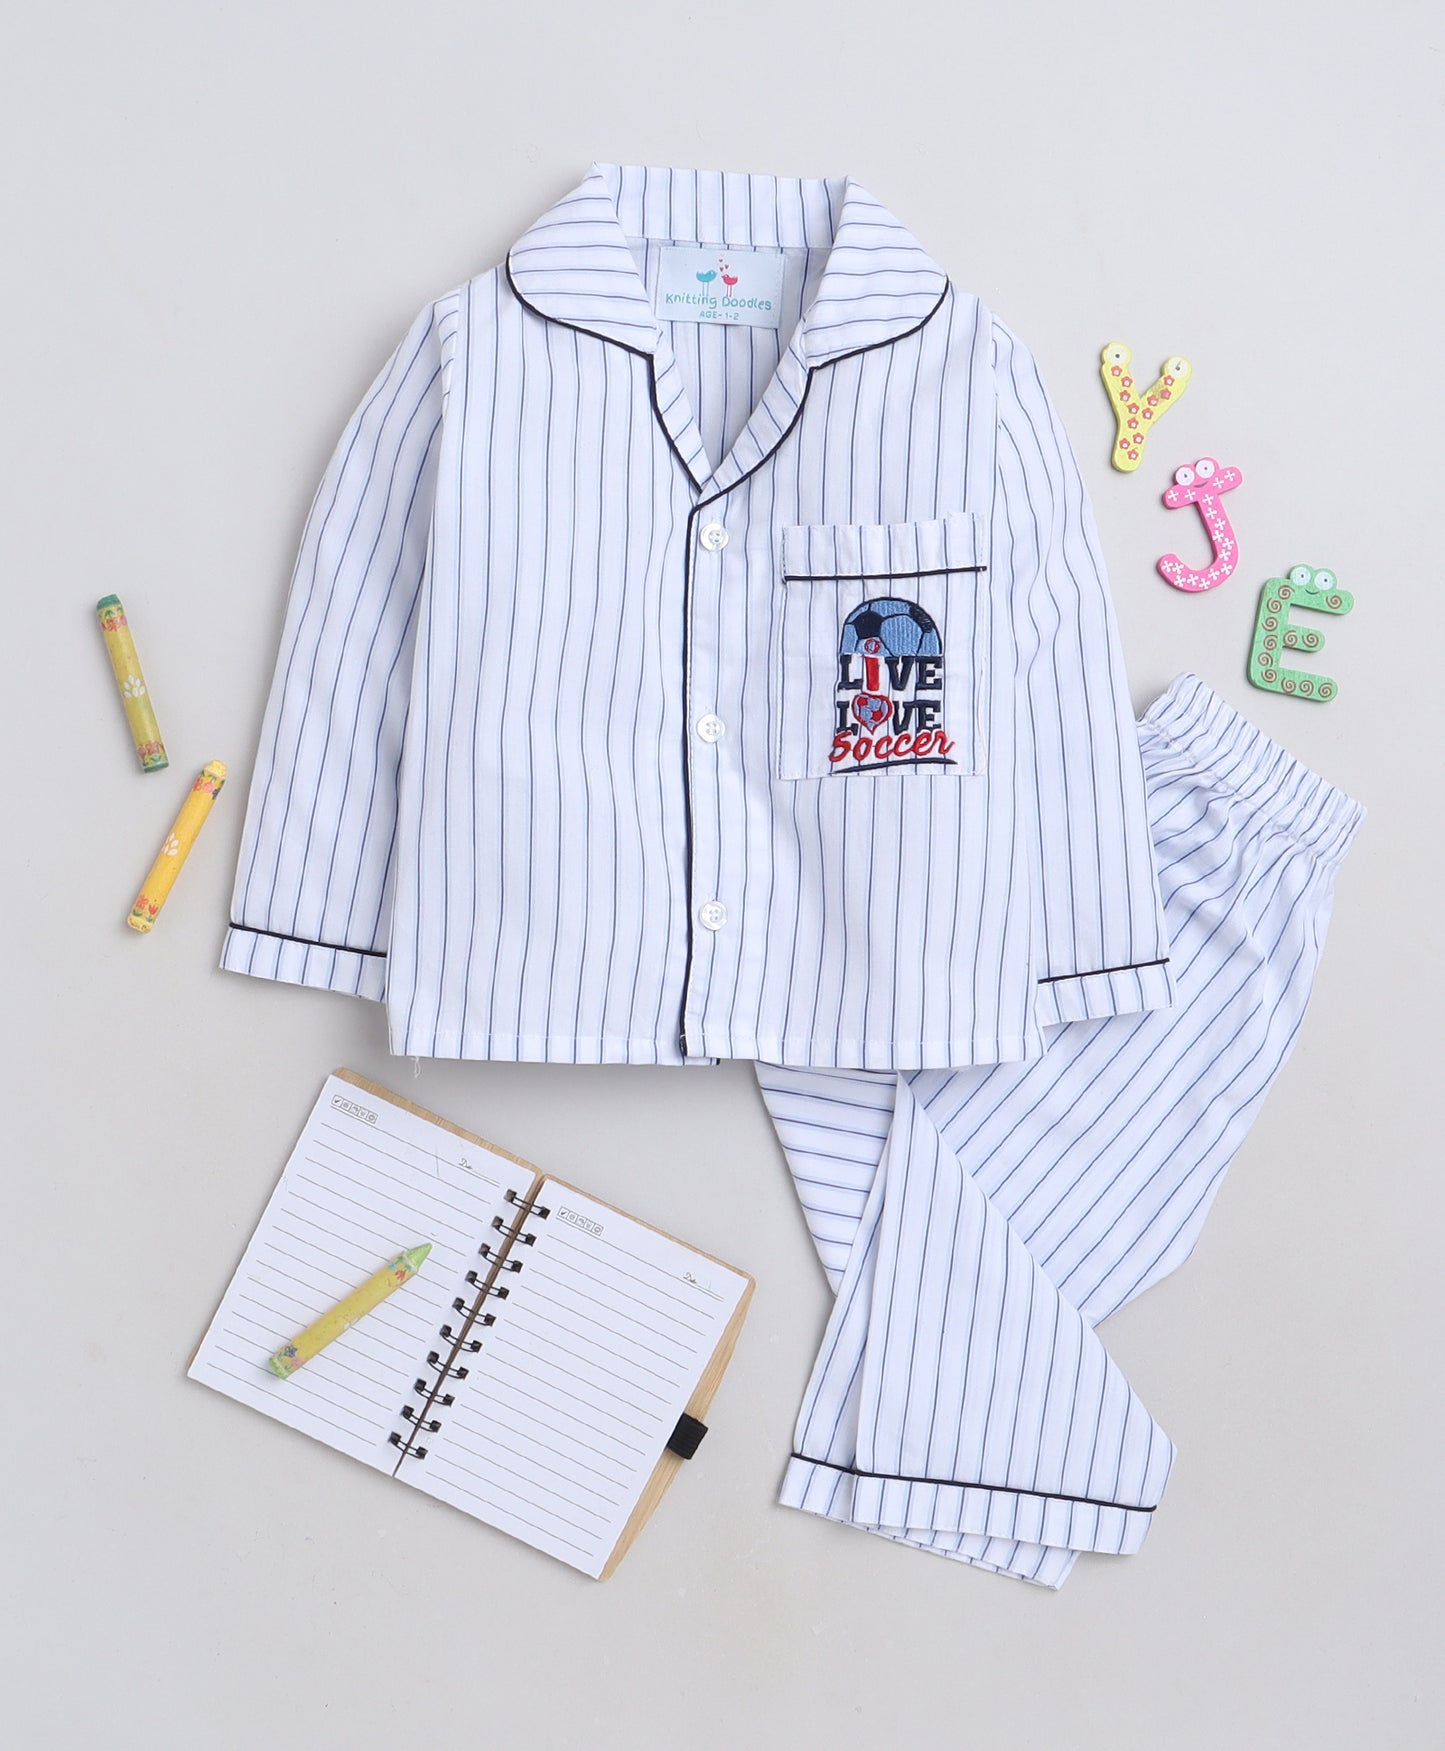 Knitting Doodles Premium Cotton Kids' Stripes Night suit with Live, Love soccer embroidery on pocket- White